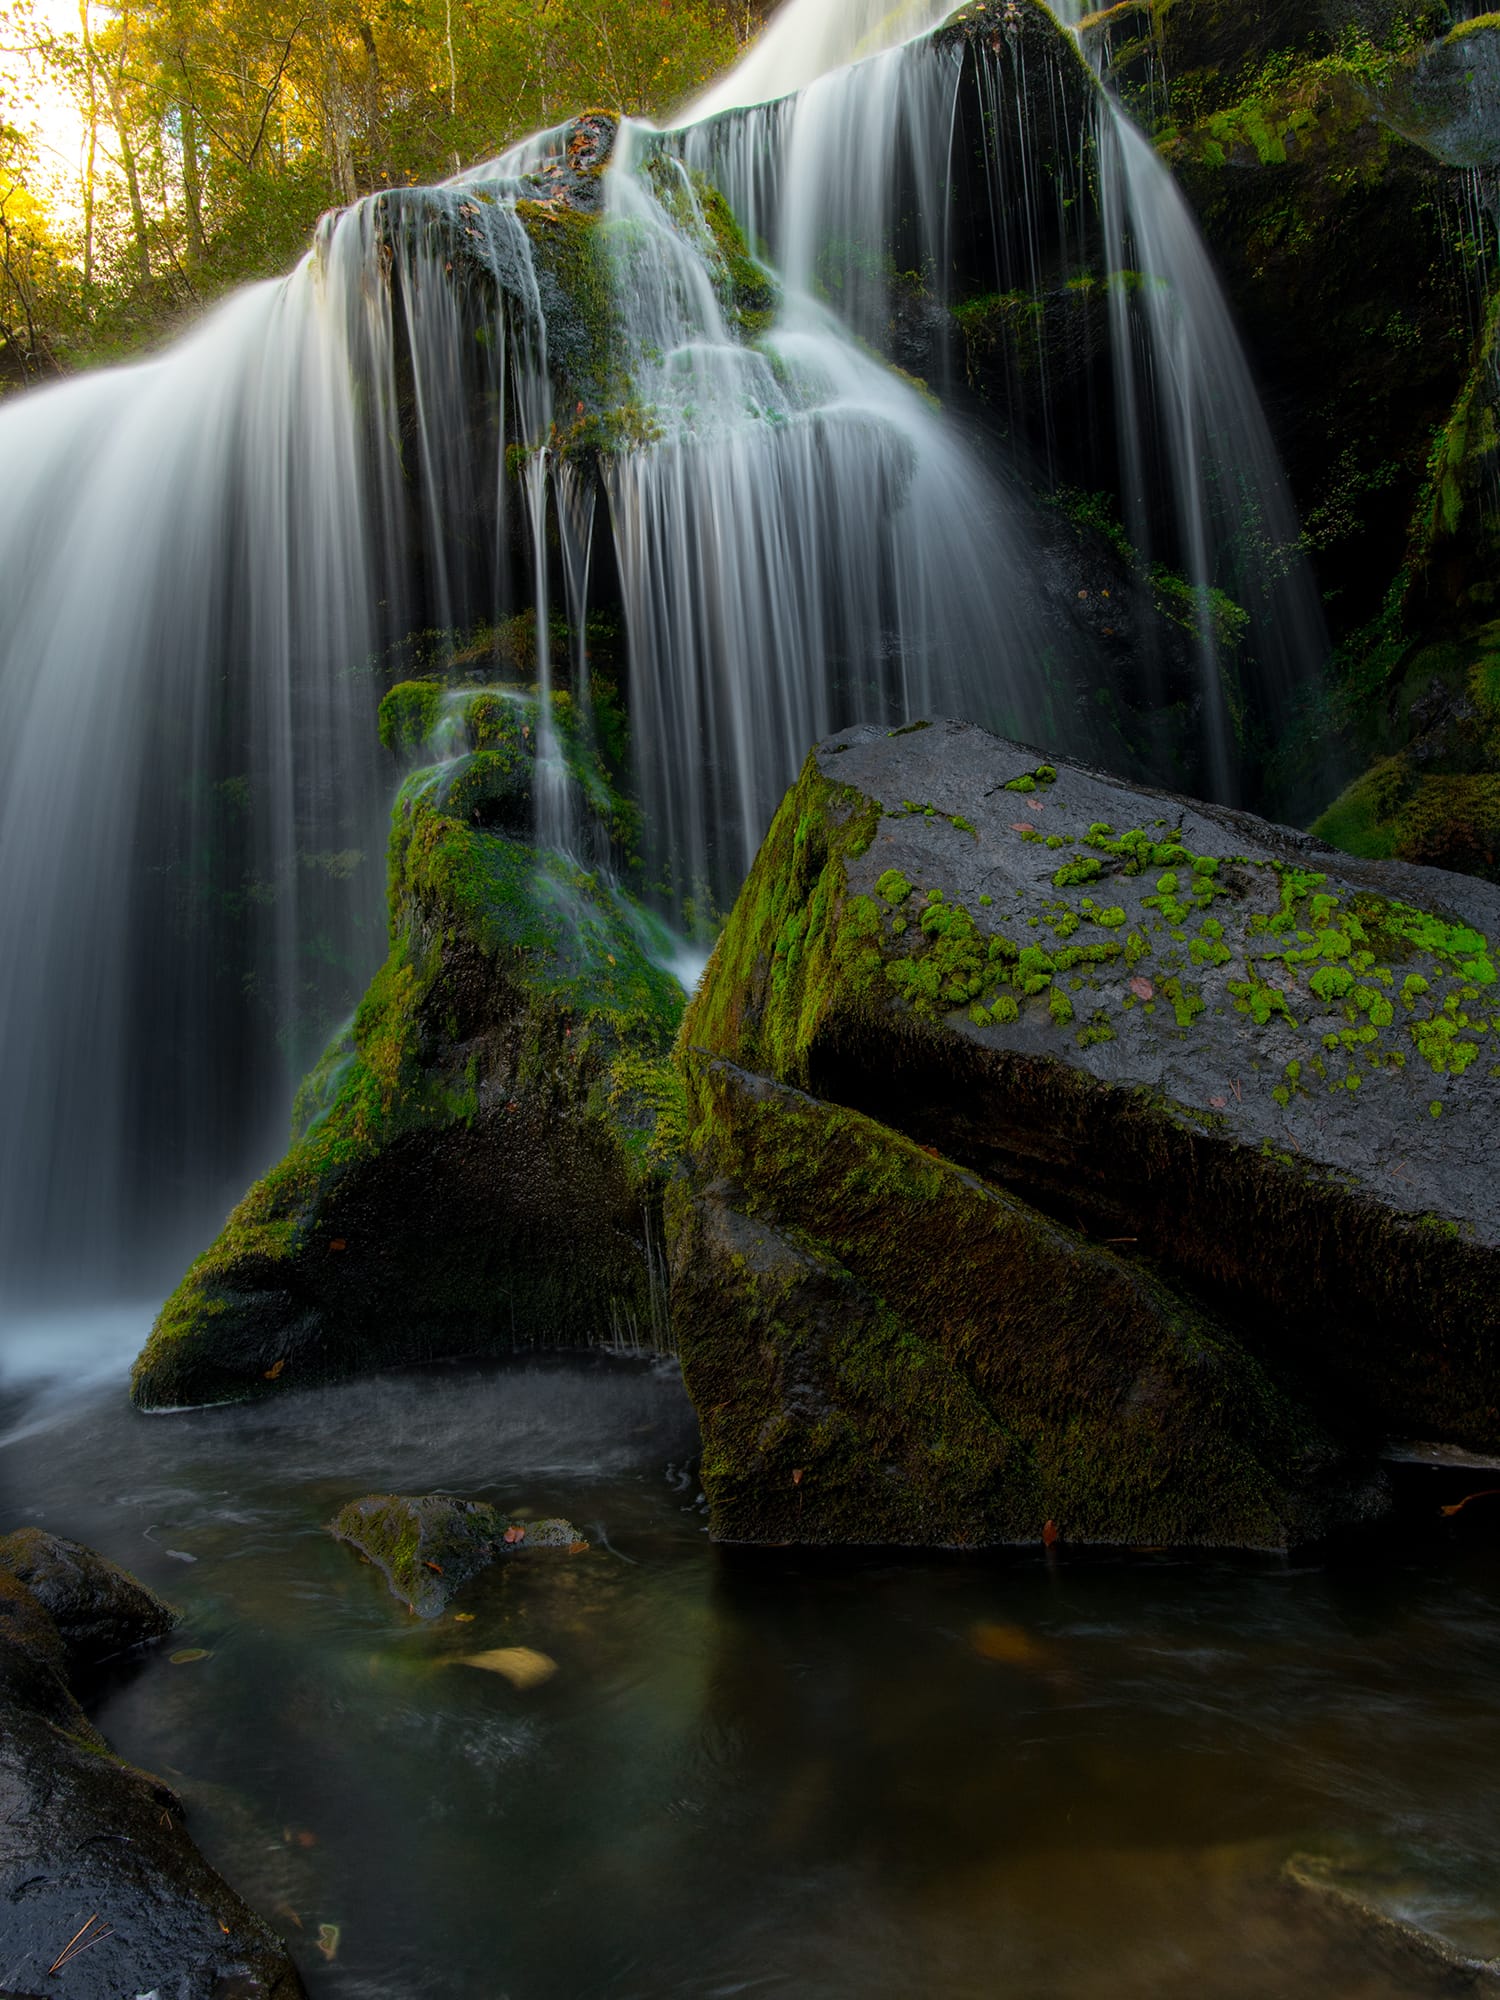 The Complete Guide to Shooting Incredible Waterfall Images